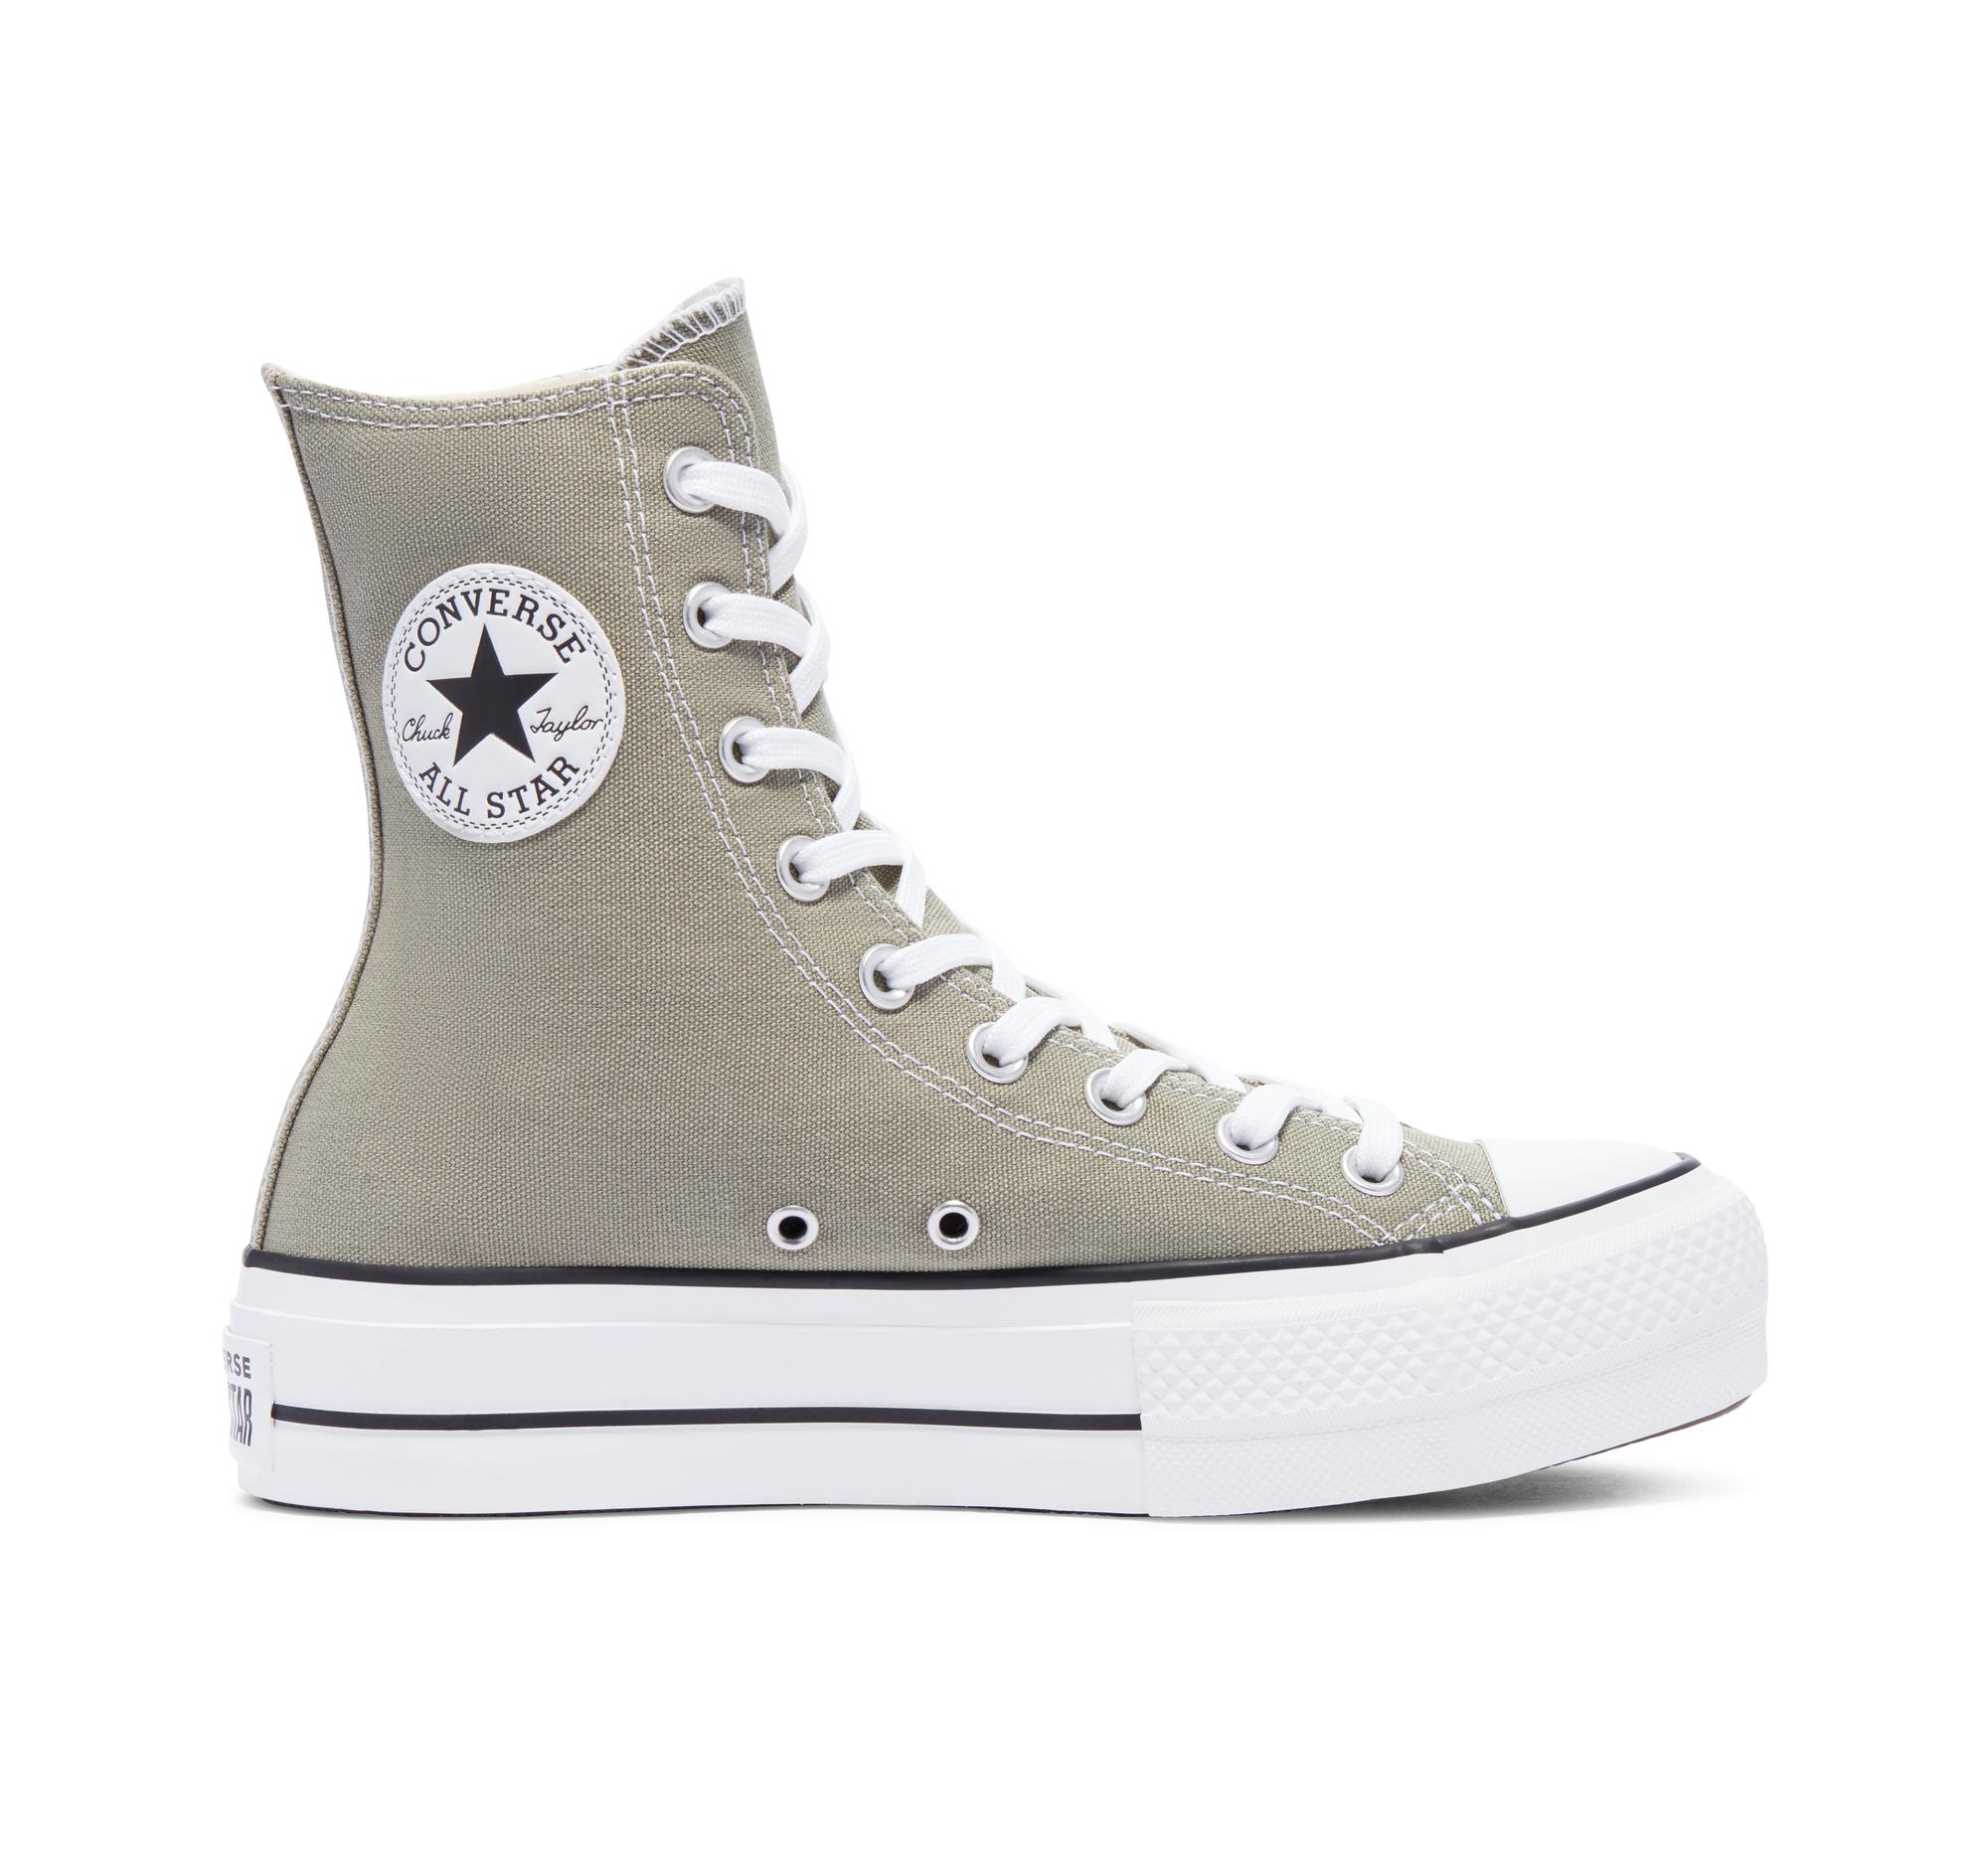 Converse Colors High Tops | vlr.eng.br